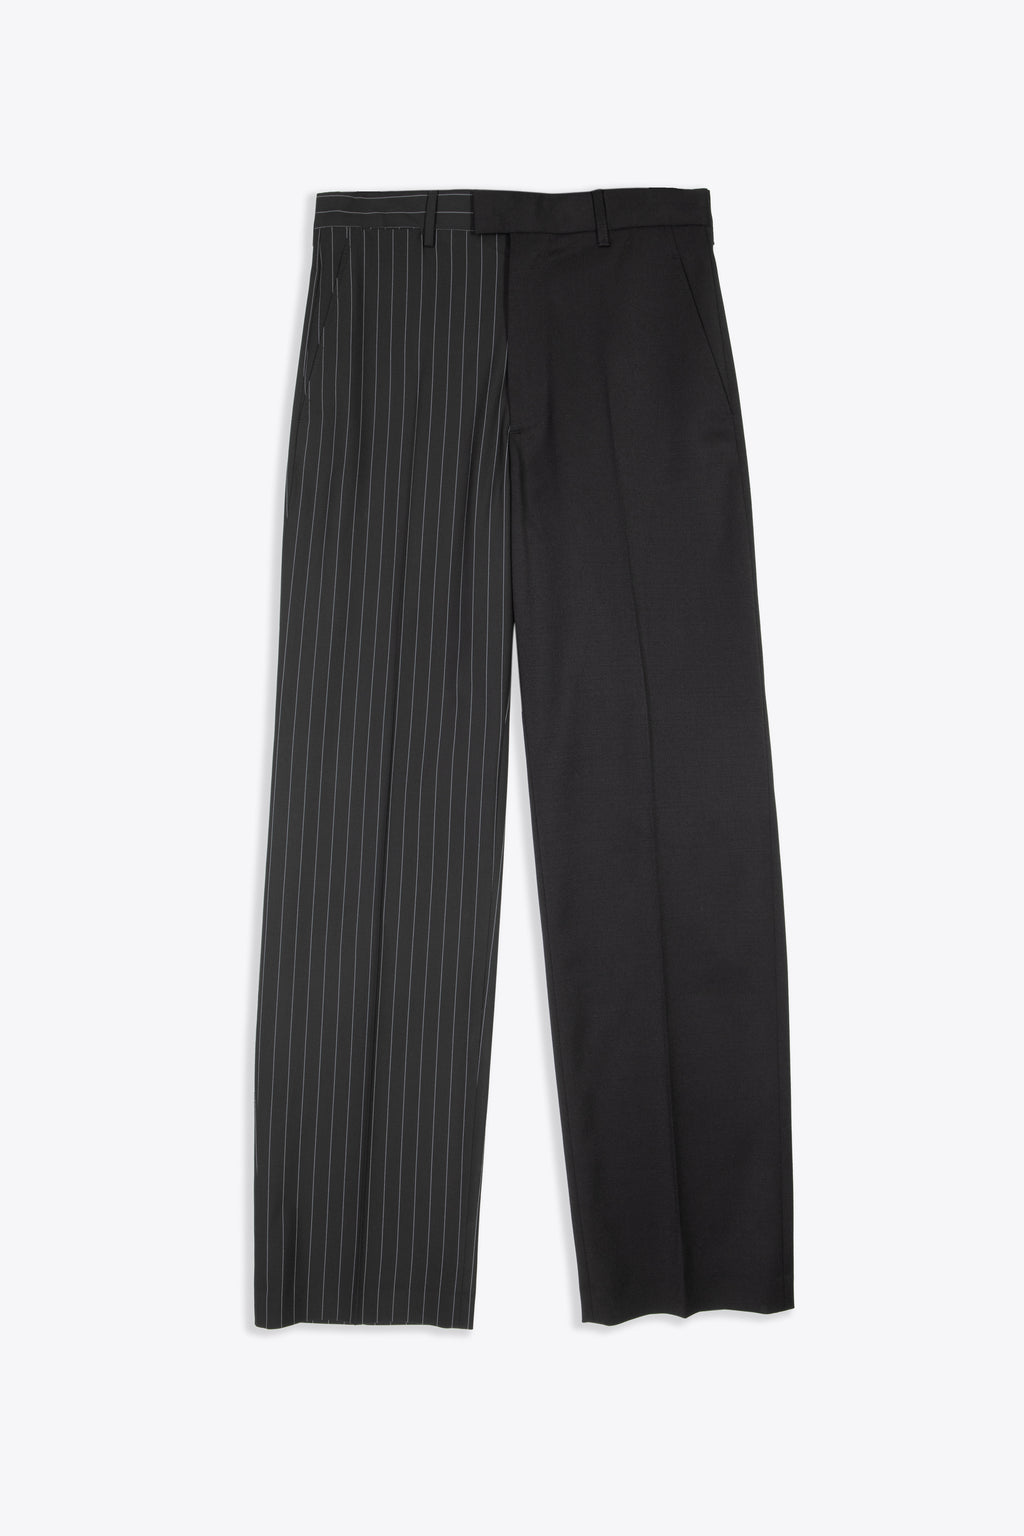 alt-image__Black-tailored-pant-with-pinstriped-single-leg-